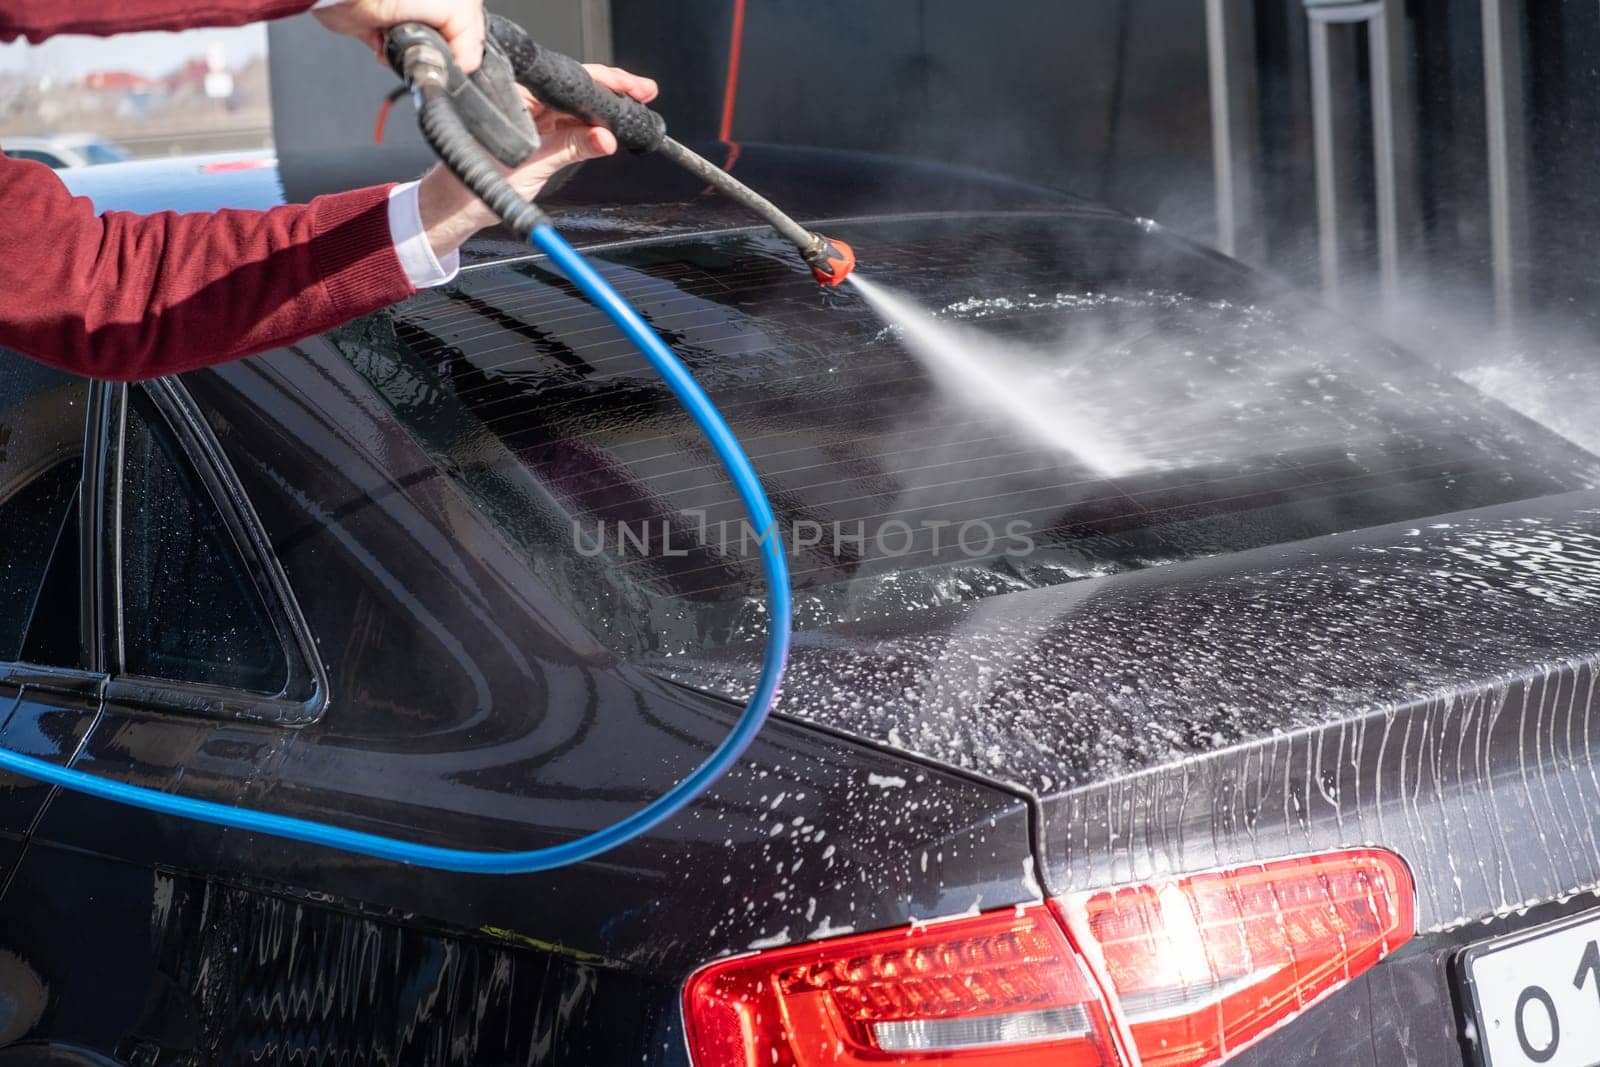 A man washes off the foam while washing the car. A vehicle is engulfed in soapy foam during a car wash, covering the tires, wheels, hood, and entire exterior of the car. Self-service car wash